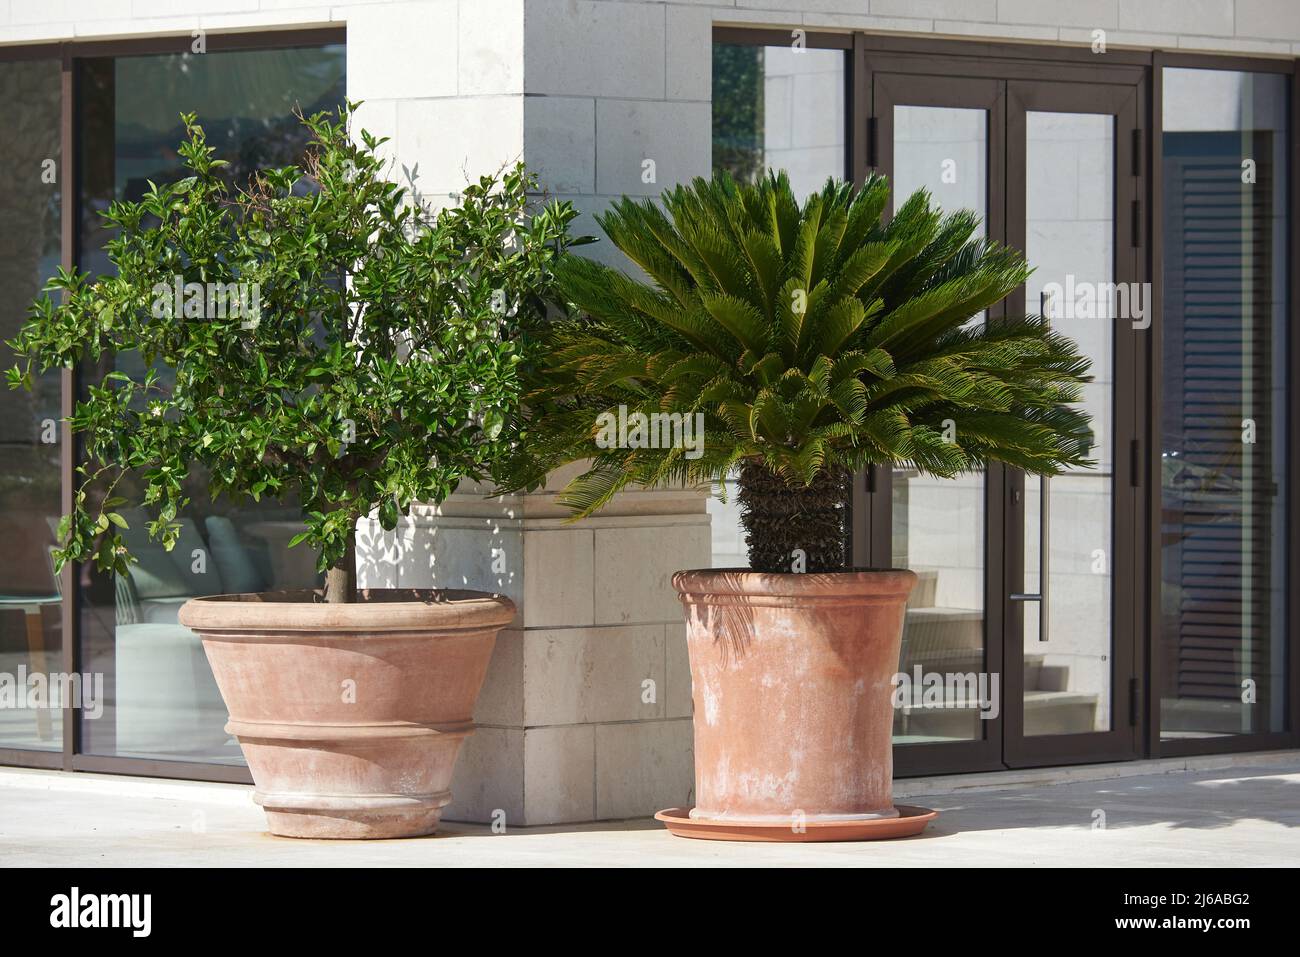 Outdoor plants in large clay pots outside the building Stock Photo